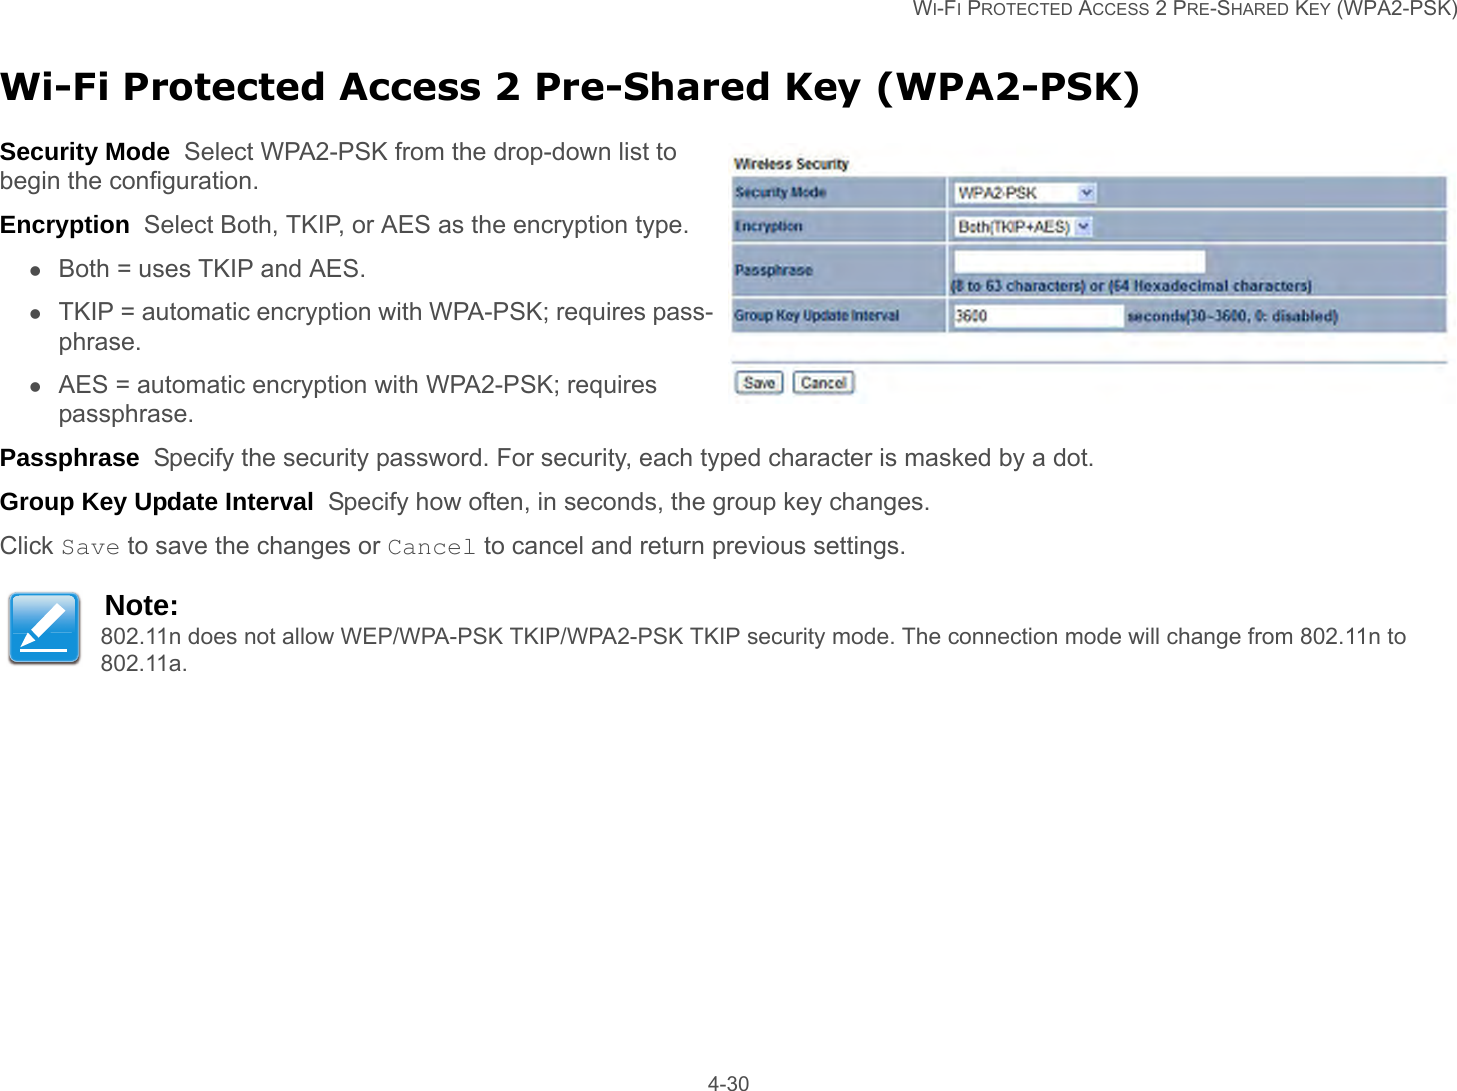   WI-FI PROTECTED ACCESS 2 PRE-SHARED KEY (WPA2-PSK) 4-30Wi-Fi Protected Access 2 Pre-Shared Key (WPA2-PSK)Security Mode  Select WPA2-PSK from the drop-down list to begin the configuration.Encryption  Select Both, TKIP, or AES as the encryption type.Both = uses TKIP and AES.TKIP = automatic encryption with WPA-PSK; requires pass-phrase.AES = automatic encryption with WPA2-PSK; requires passphrase.Passphrase  Specify the security password. For security, each typed character is masked by a dot.Group Key Update Interval  Specify how often, in seconds, the group key changes.Click Save to save the changes or Cancel to cancel and return previous settings.Note:802.11n does not allow WEP/WPA-PSK TKIP/WPA2-PSK TKIP security mode. The connection mode will change from 802.11n to 802.11a.